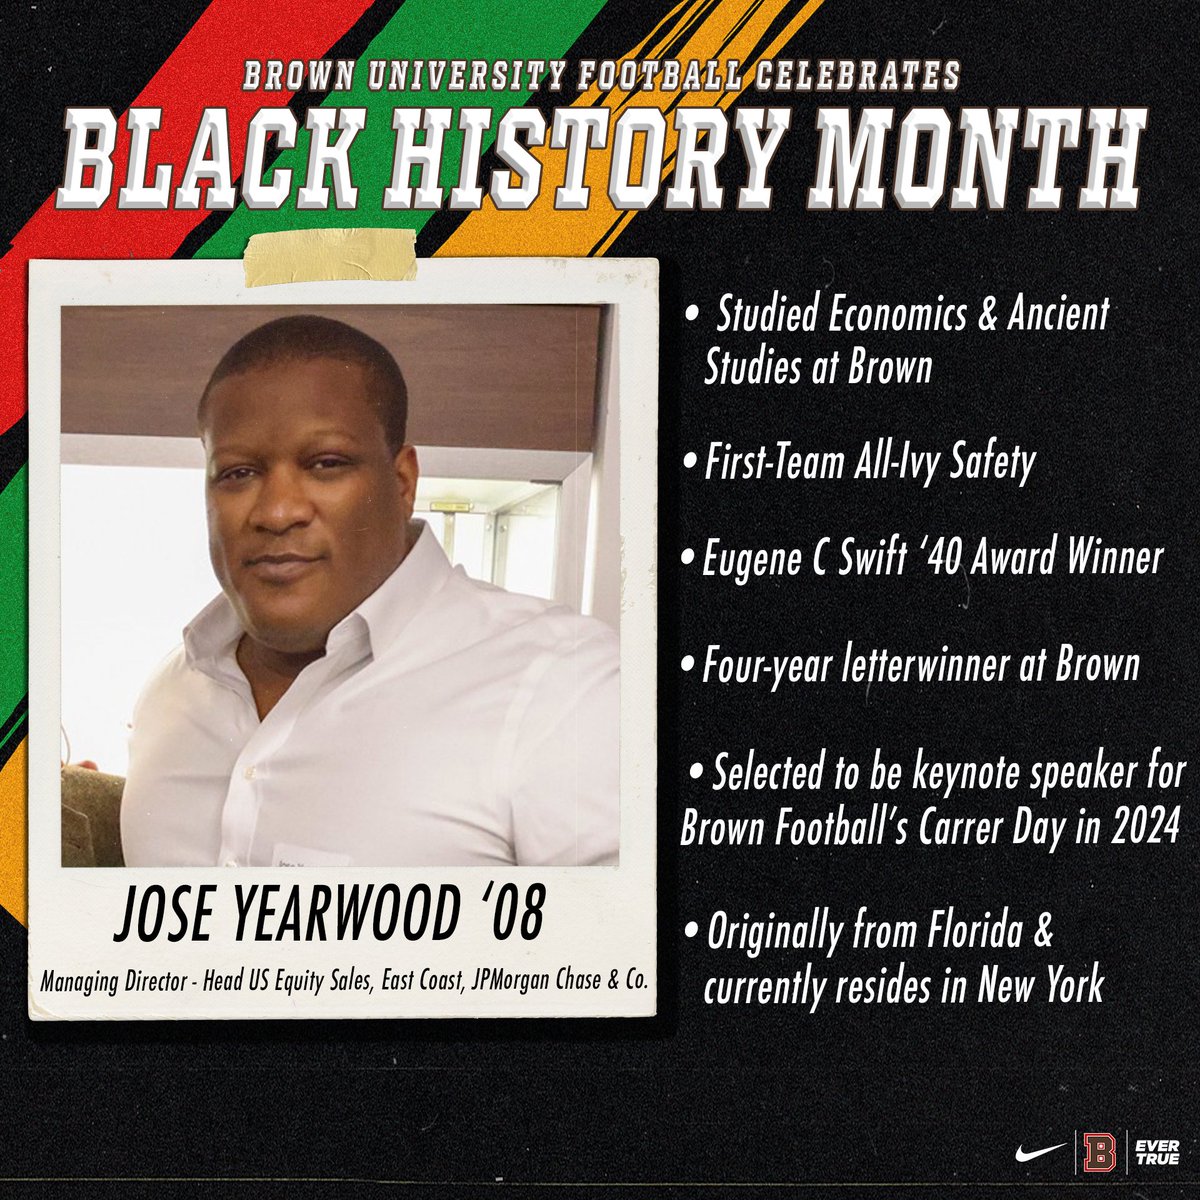 Today we recognize Jose Yearwood '08. Jose was a four-time, letter-winning safety, First-Team All Ivy and recipient of the Eugene C. Swift '40 Award. He currently works at @jpmorgan as the Managing Director - Head US Equity Sales, East Coast. #EverTrue #BlackHistoryMonth